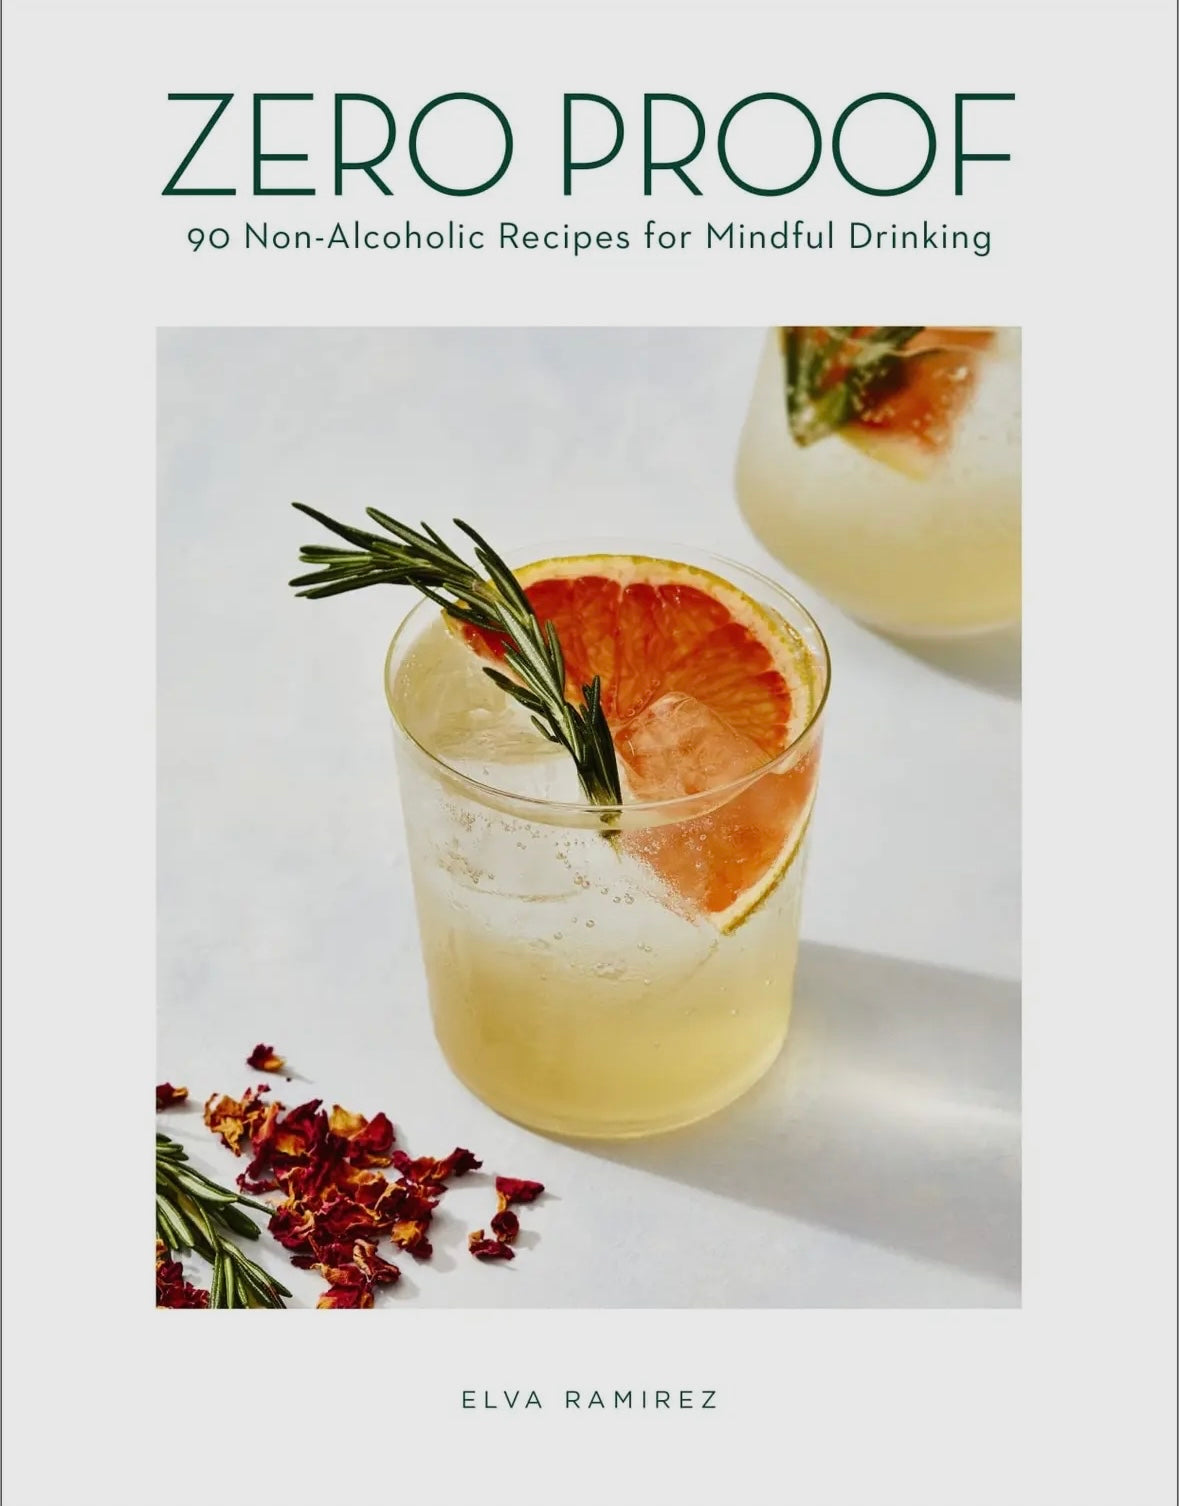 Zero Proof 90 Non-Alcoholic Recipes for Mindful Drinking